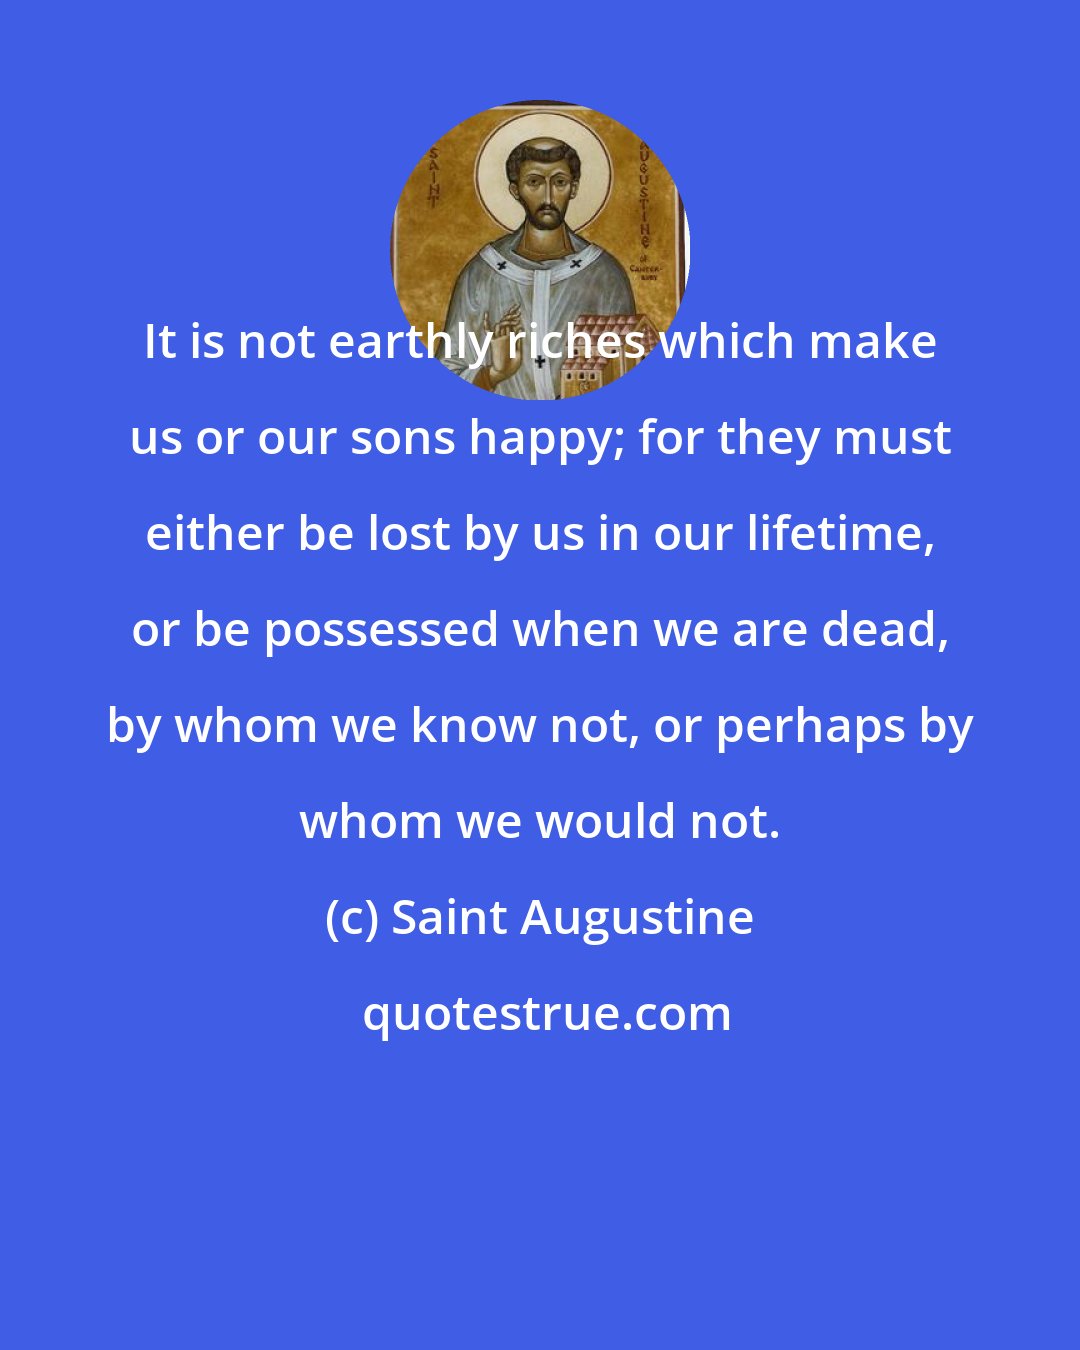 Saint Augustine: It is not earthly riches which make us or our sons happy; for they must either be lost by us in our lifetime, or be possessed when we are dead, by whom we know not, or perhaps by whom we would not.